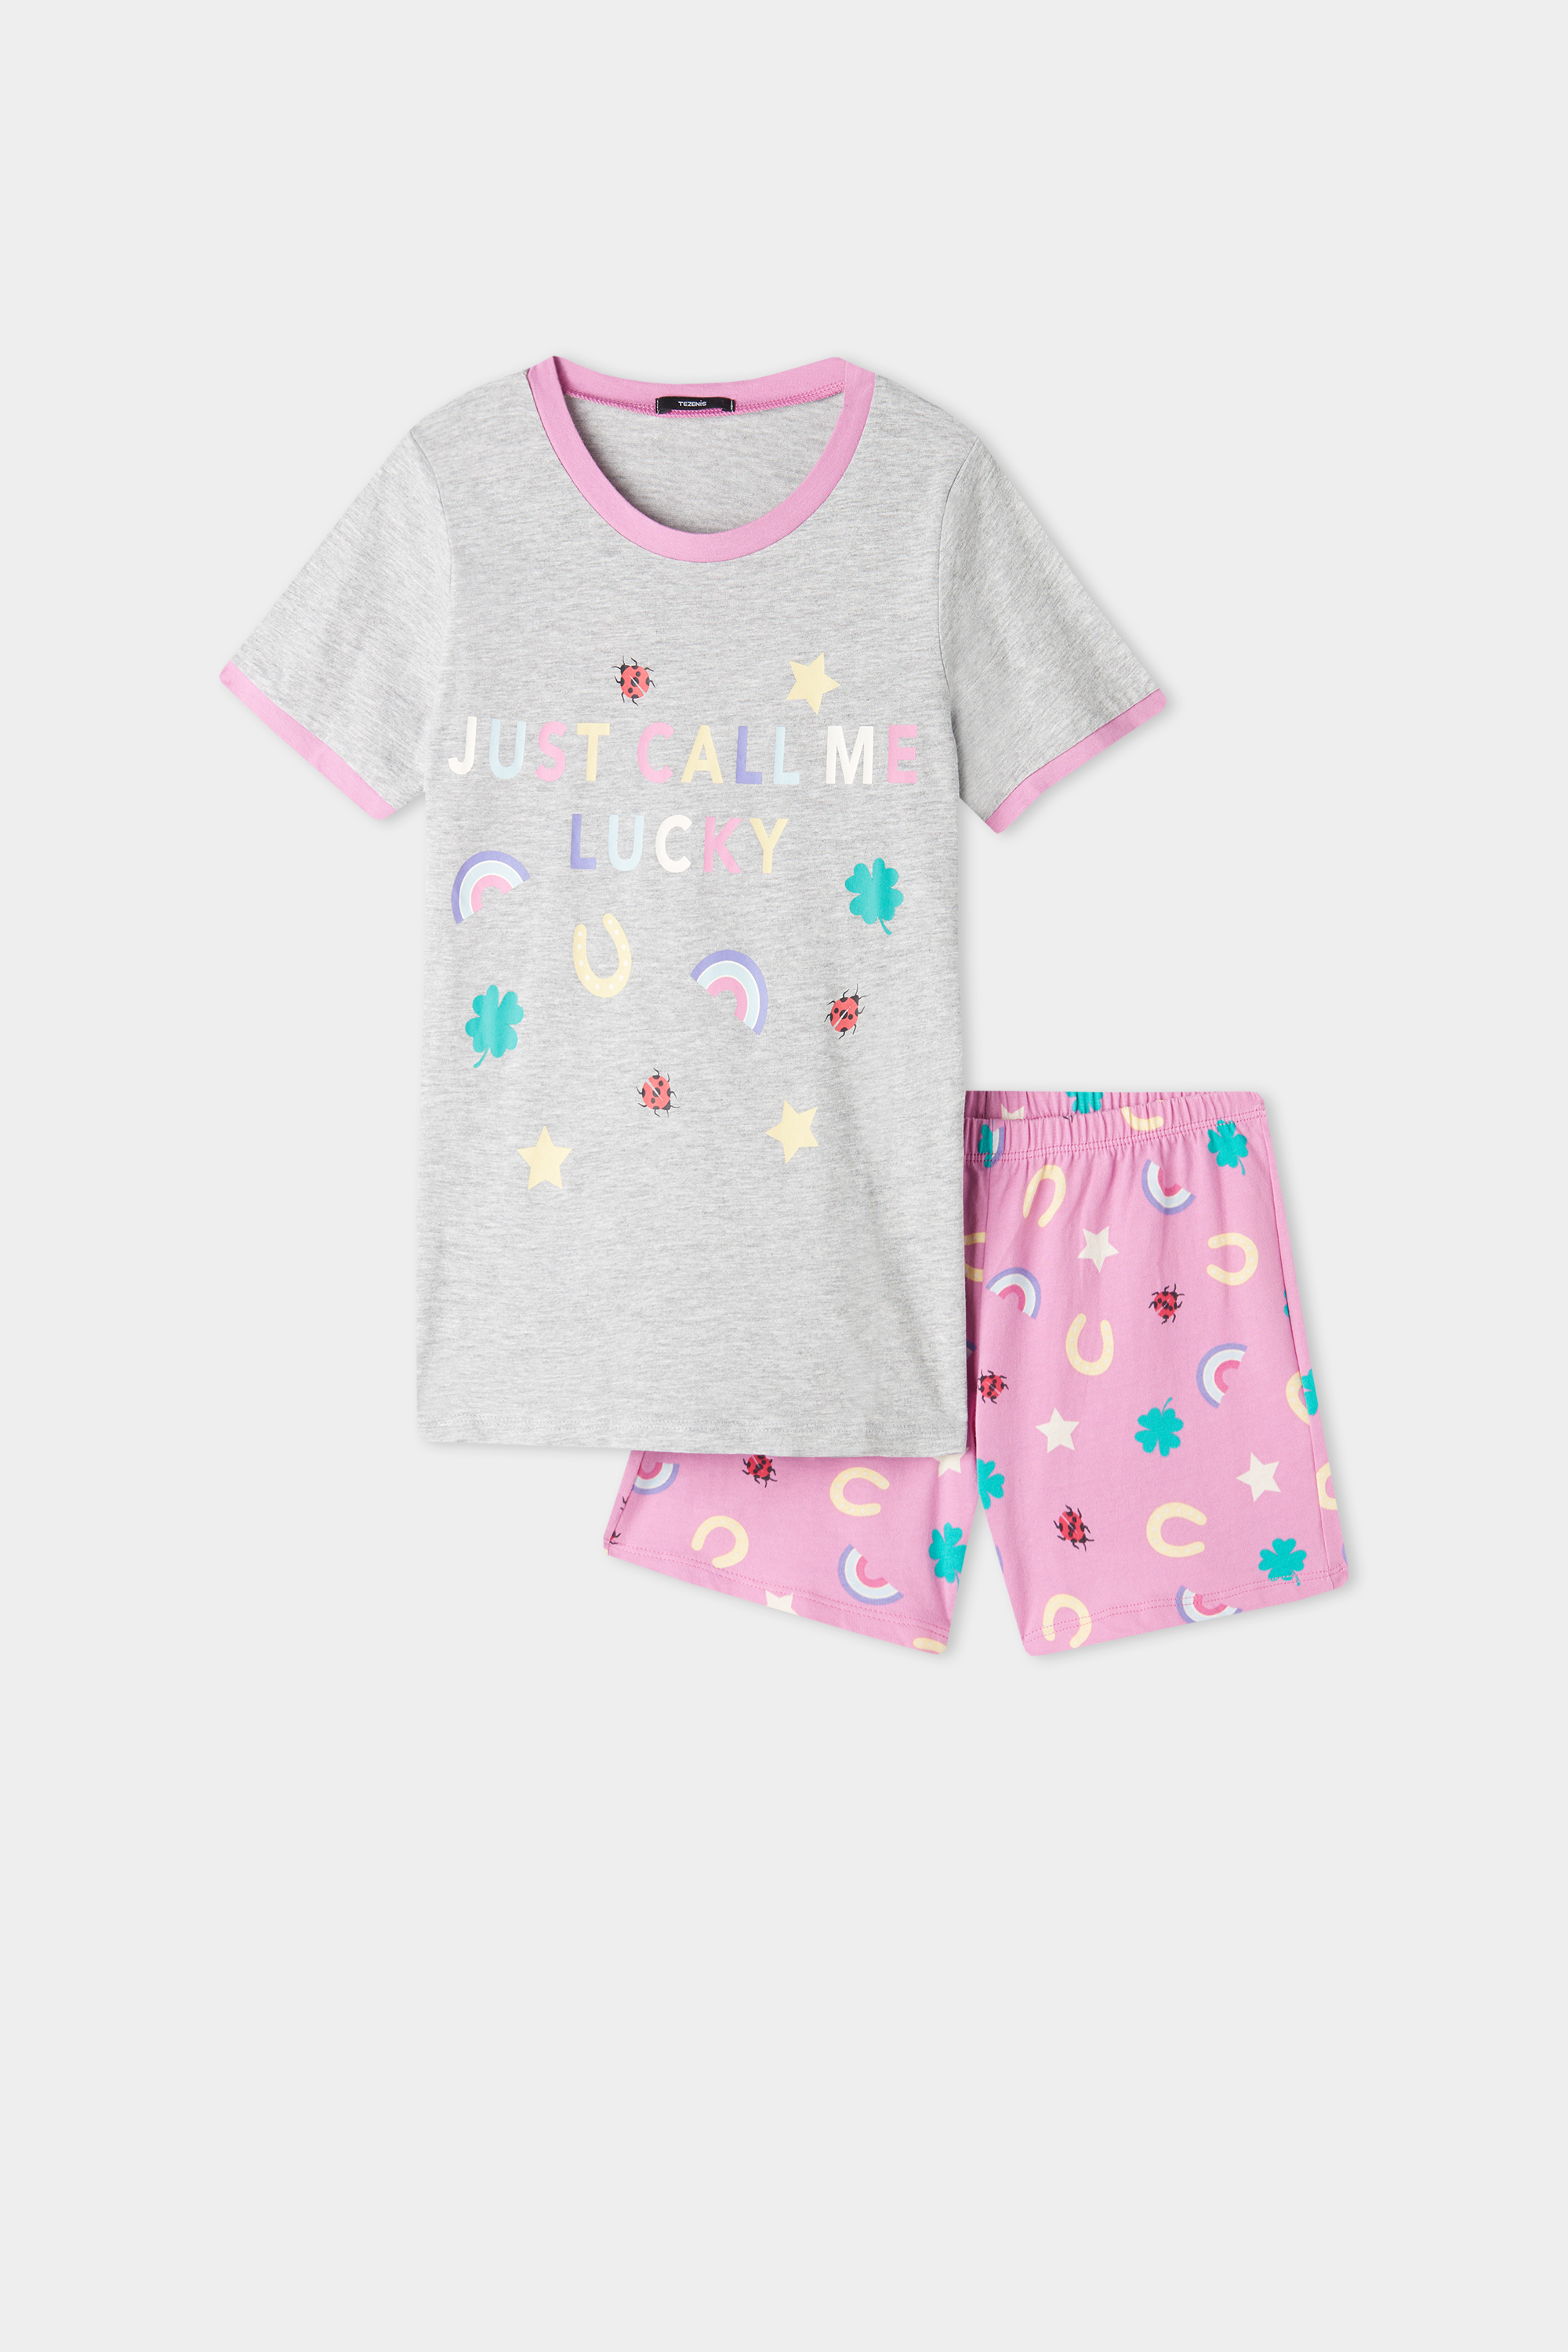 Girls’ "Lucky" Print Short Cotton Pyjamas with Rounded Neck